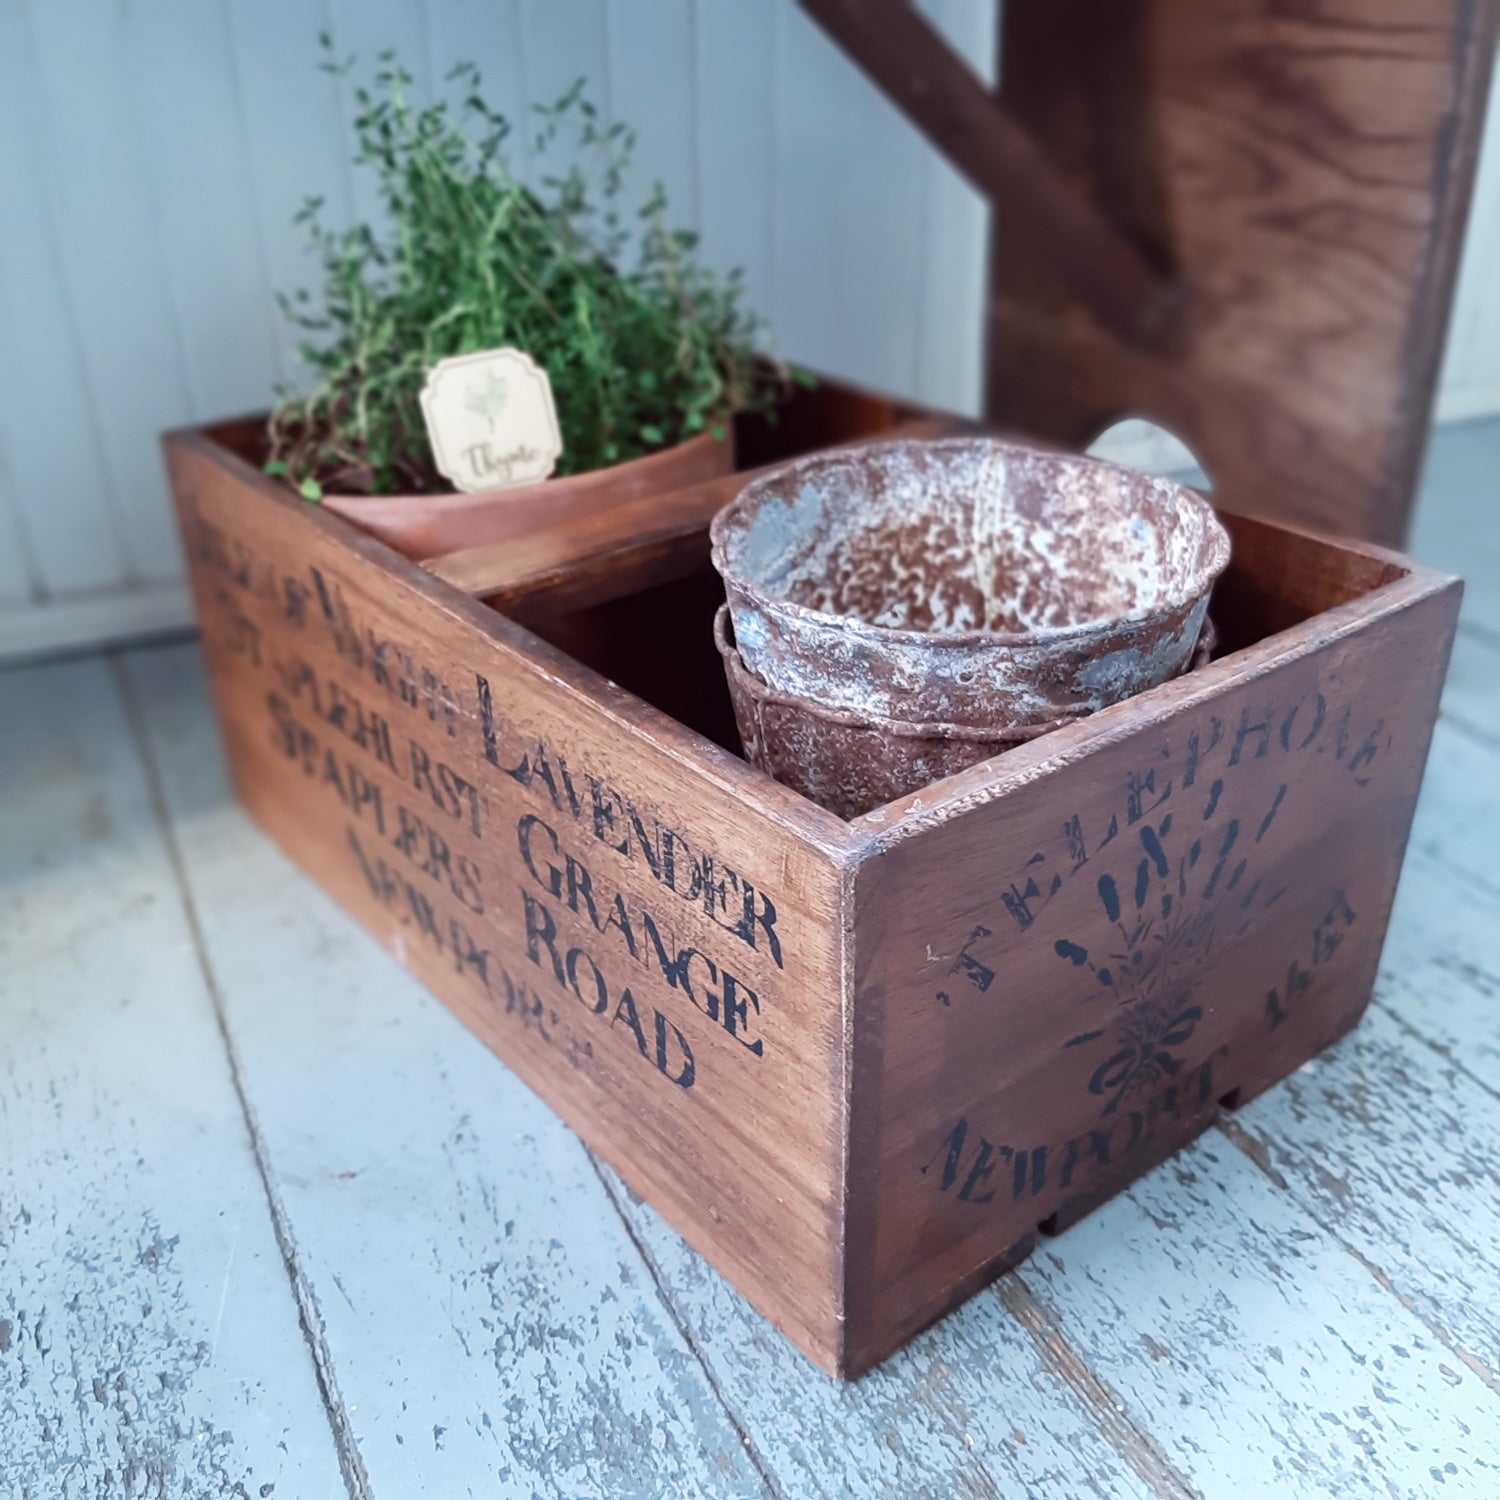 There are so many uses for this Vintage Style Wood Lavender Crate. Keep a mudroom organized or stash away root veggies in an old fashioned kitchen larder. Create an indoor herb garden by adding potted herbs to create a vintage style to your potting shed. Our Vintage Style Wood Lavender Crate includes the wooden crate with screen printed lavender logo and and a center piece to use as a handle, turning it into a garden tote.